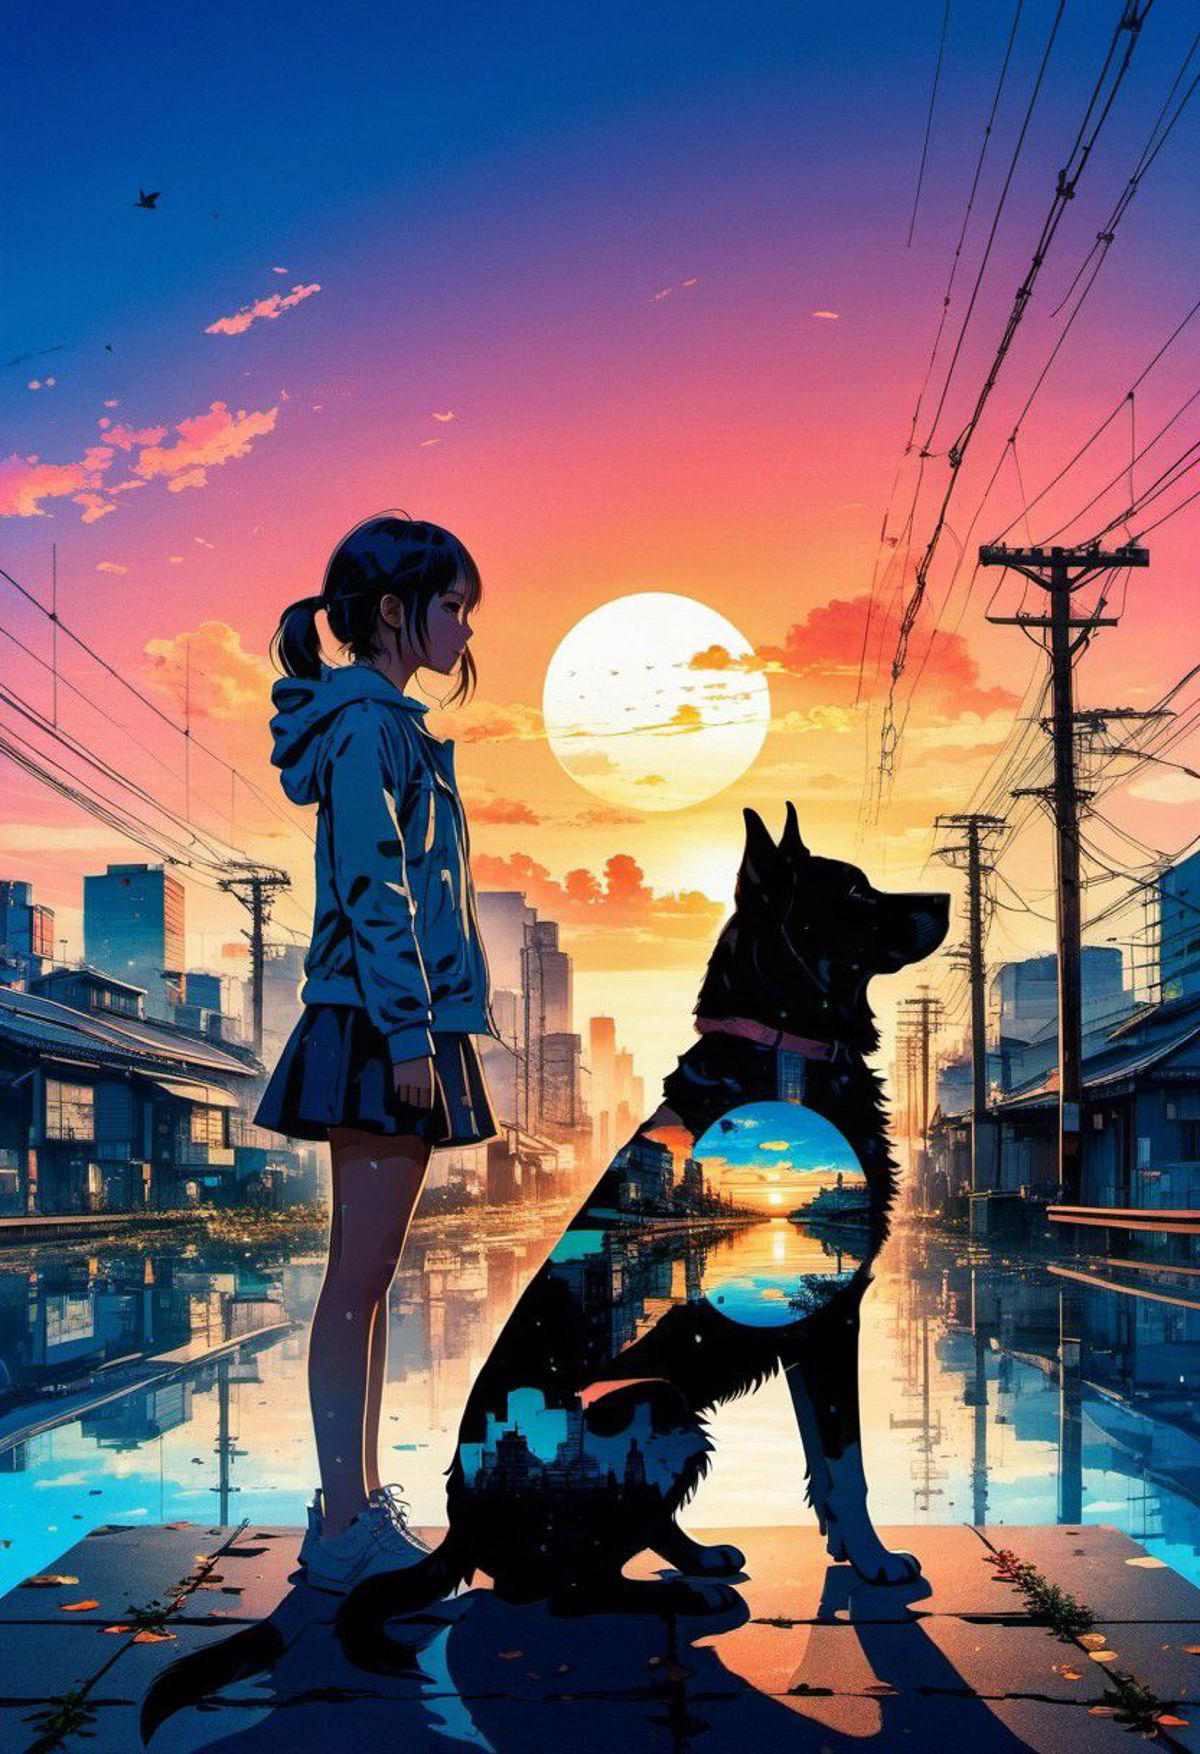 A girl and a dog standing in front of a city skyline at sunset.